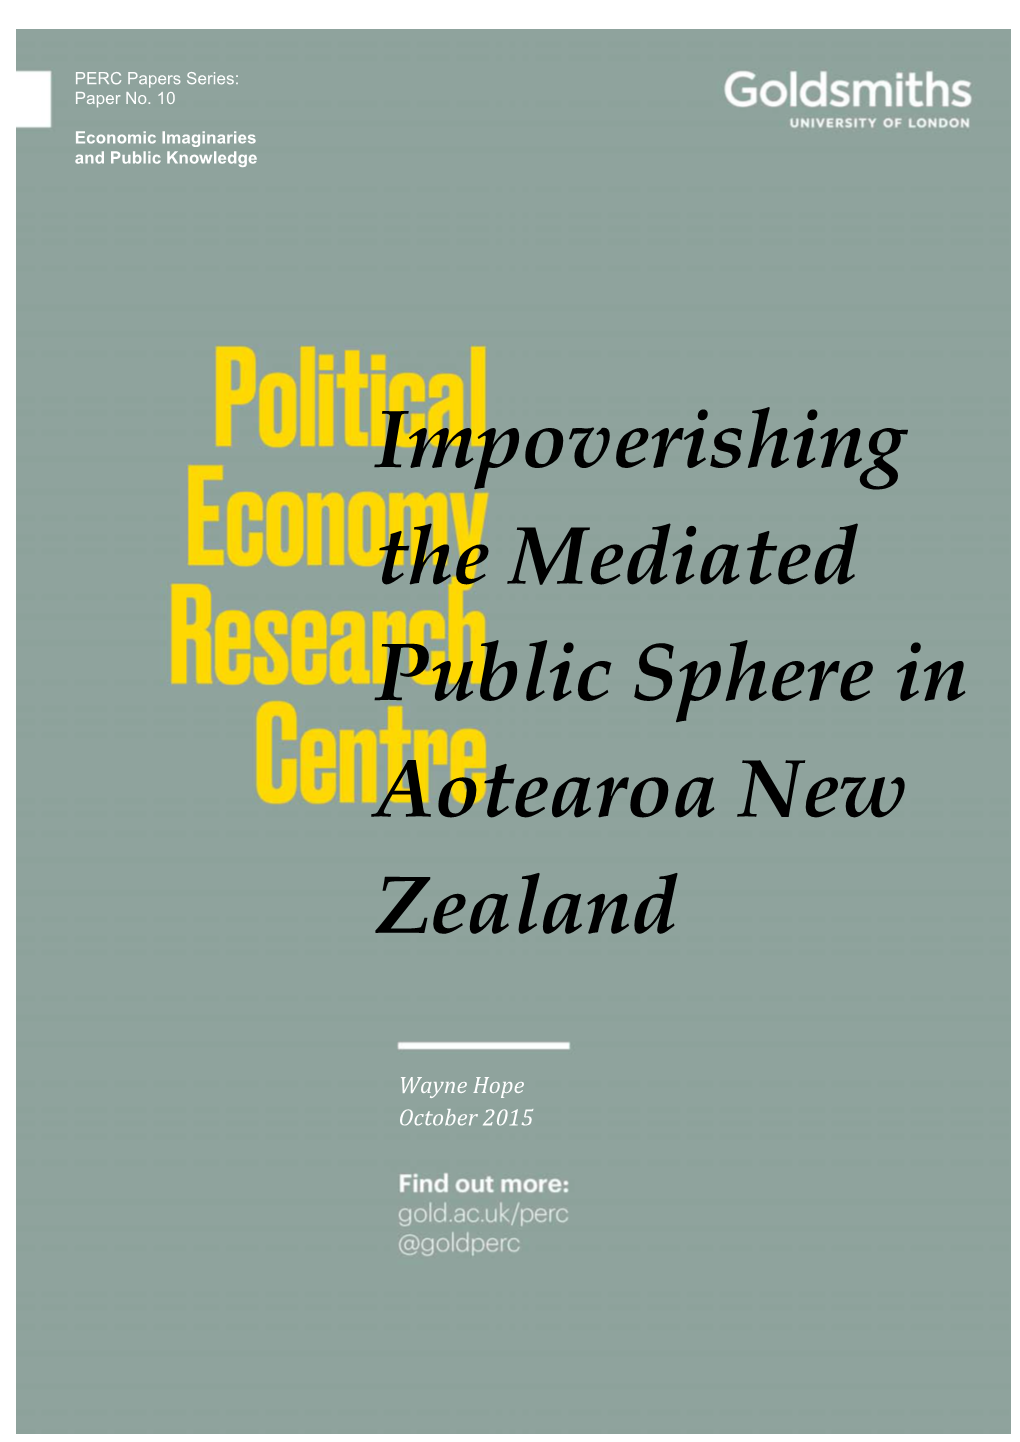 Impoverishing the Mediated Public Sphere in Aotearoa New Zealand: the Slow Demise of Television News and Current Affairs